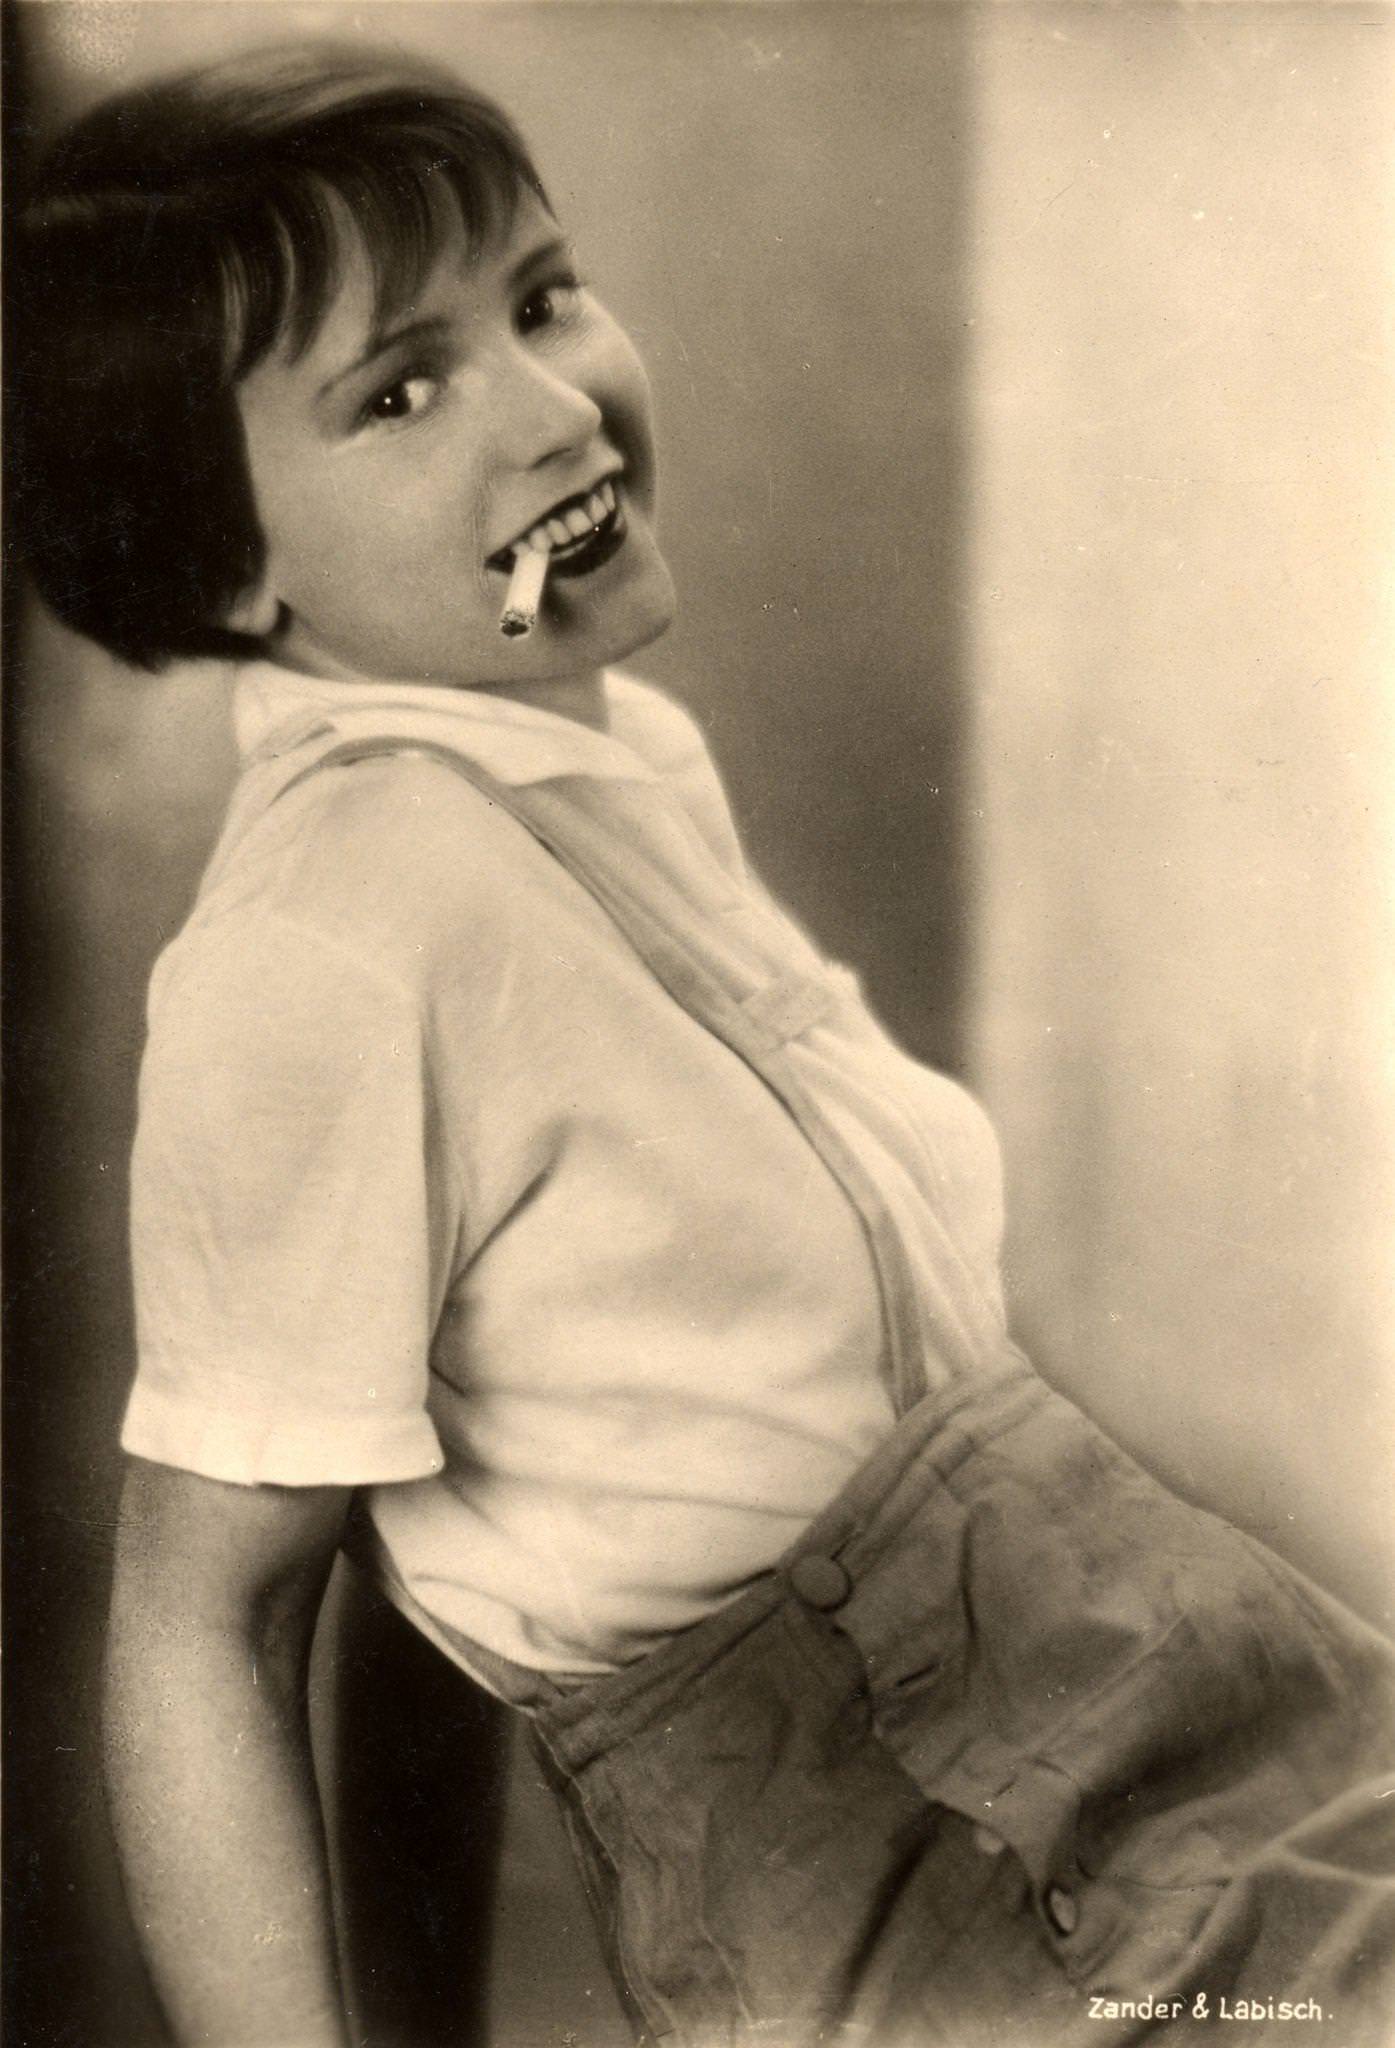 American actress Louise Brooks poses in lederhosen and smokes a cigarette in this postcard image from Germany, 1920s or 1930s.